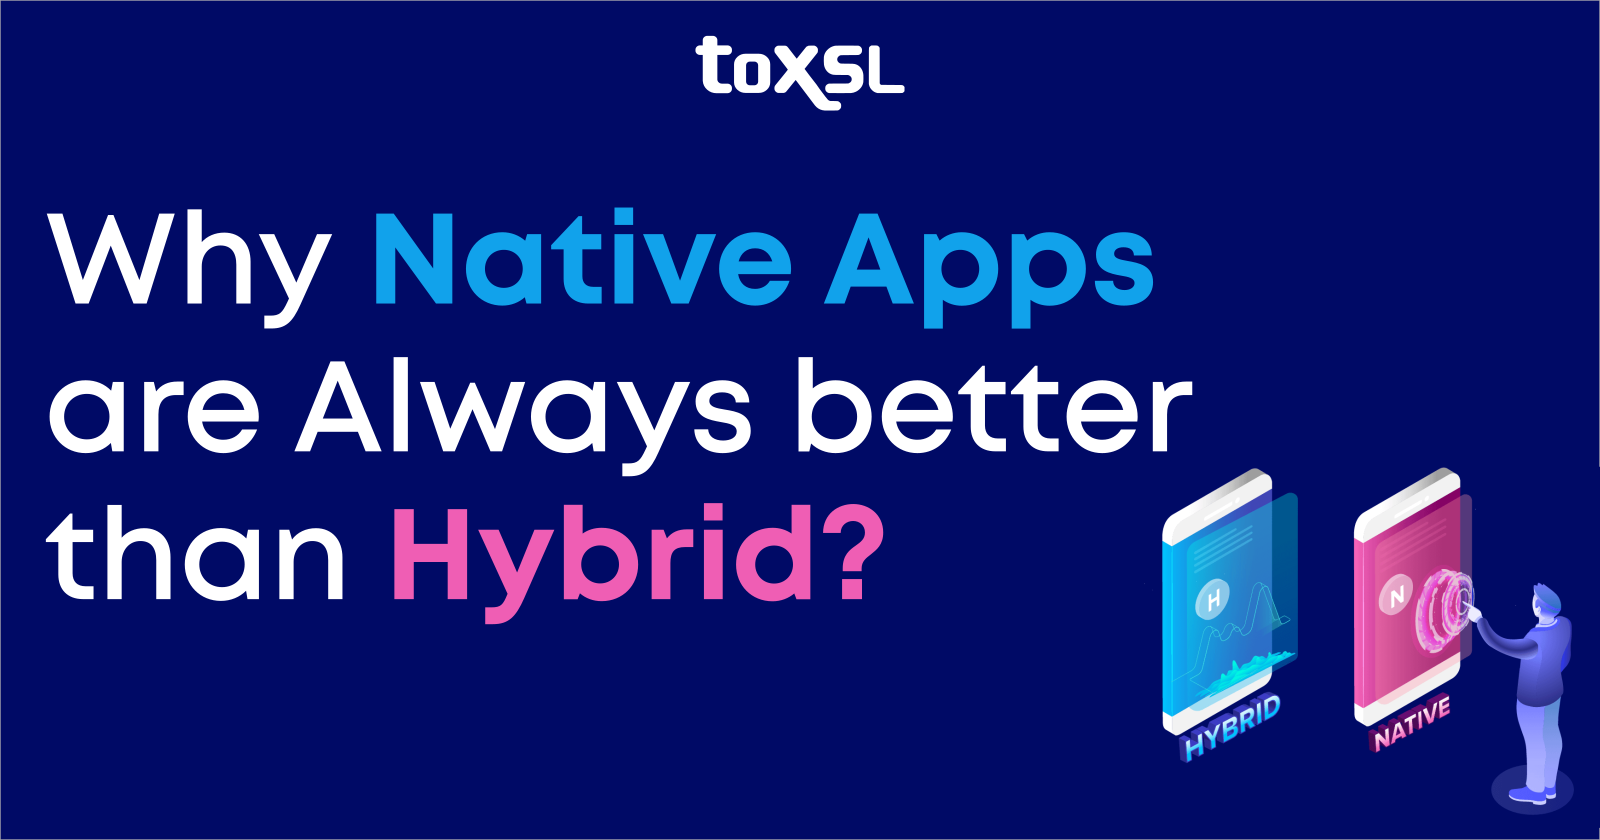 Why Native Apps are Always better than Hybrid?